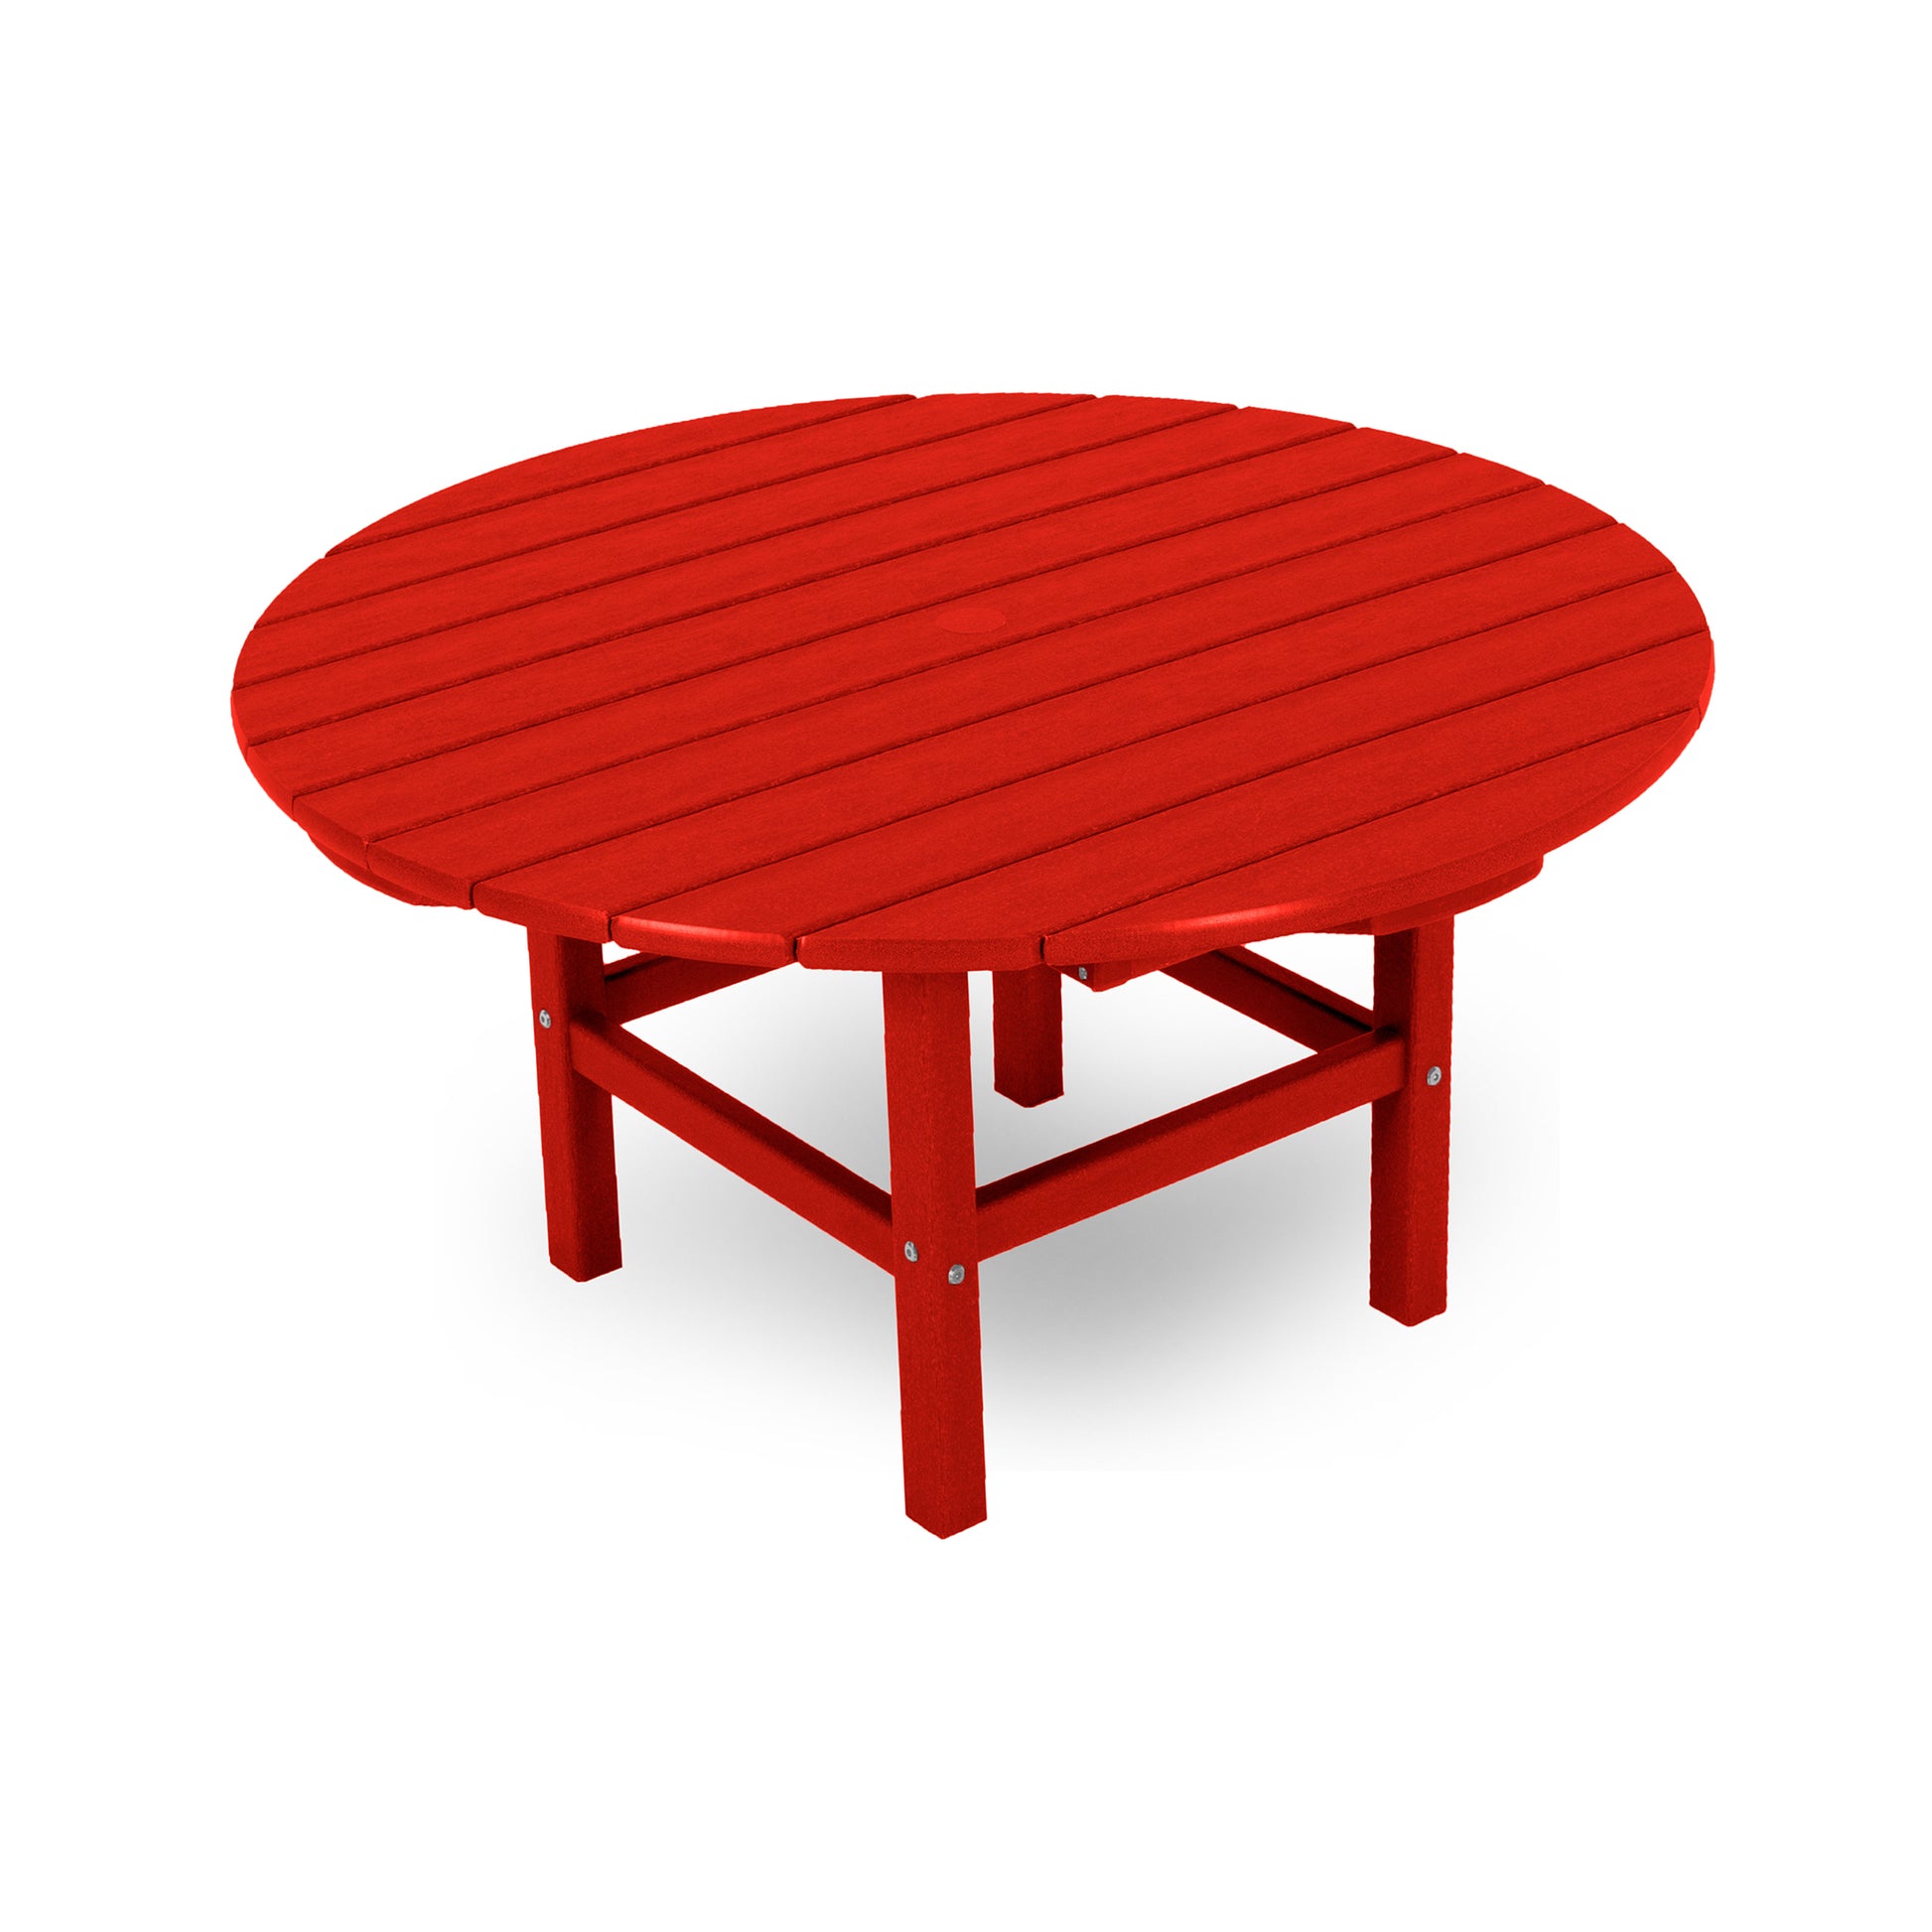 A red round POLYWOOD® picnic table with attached benches on a white background.